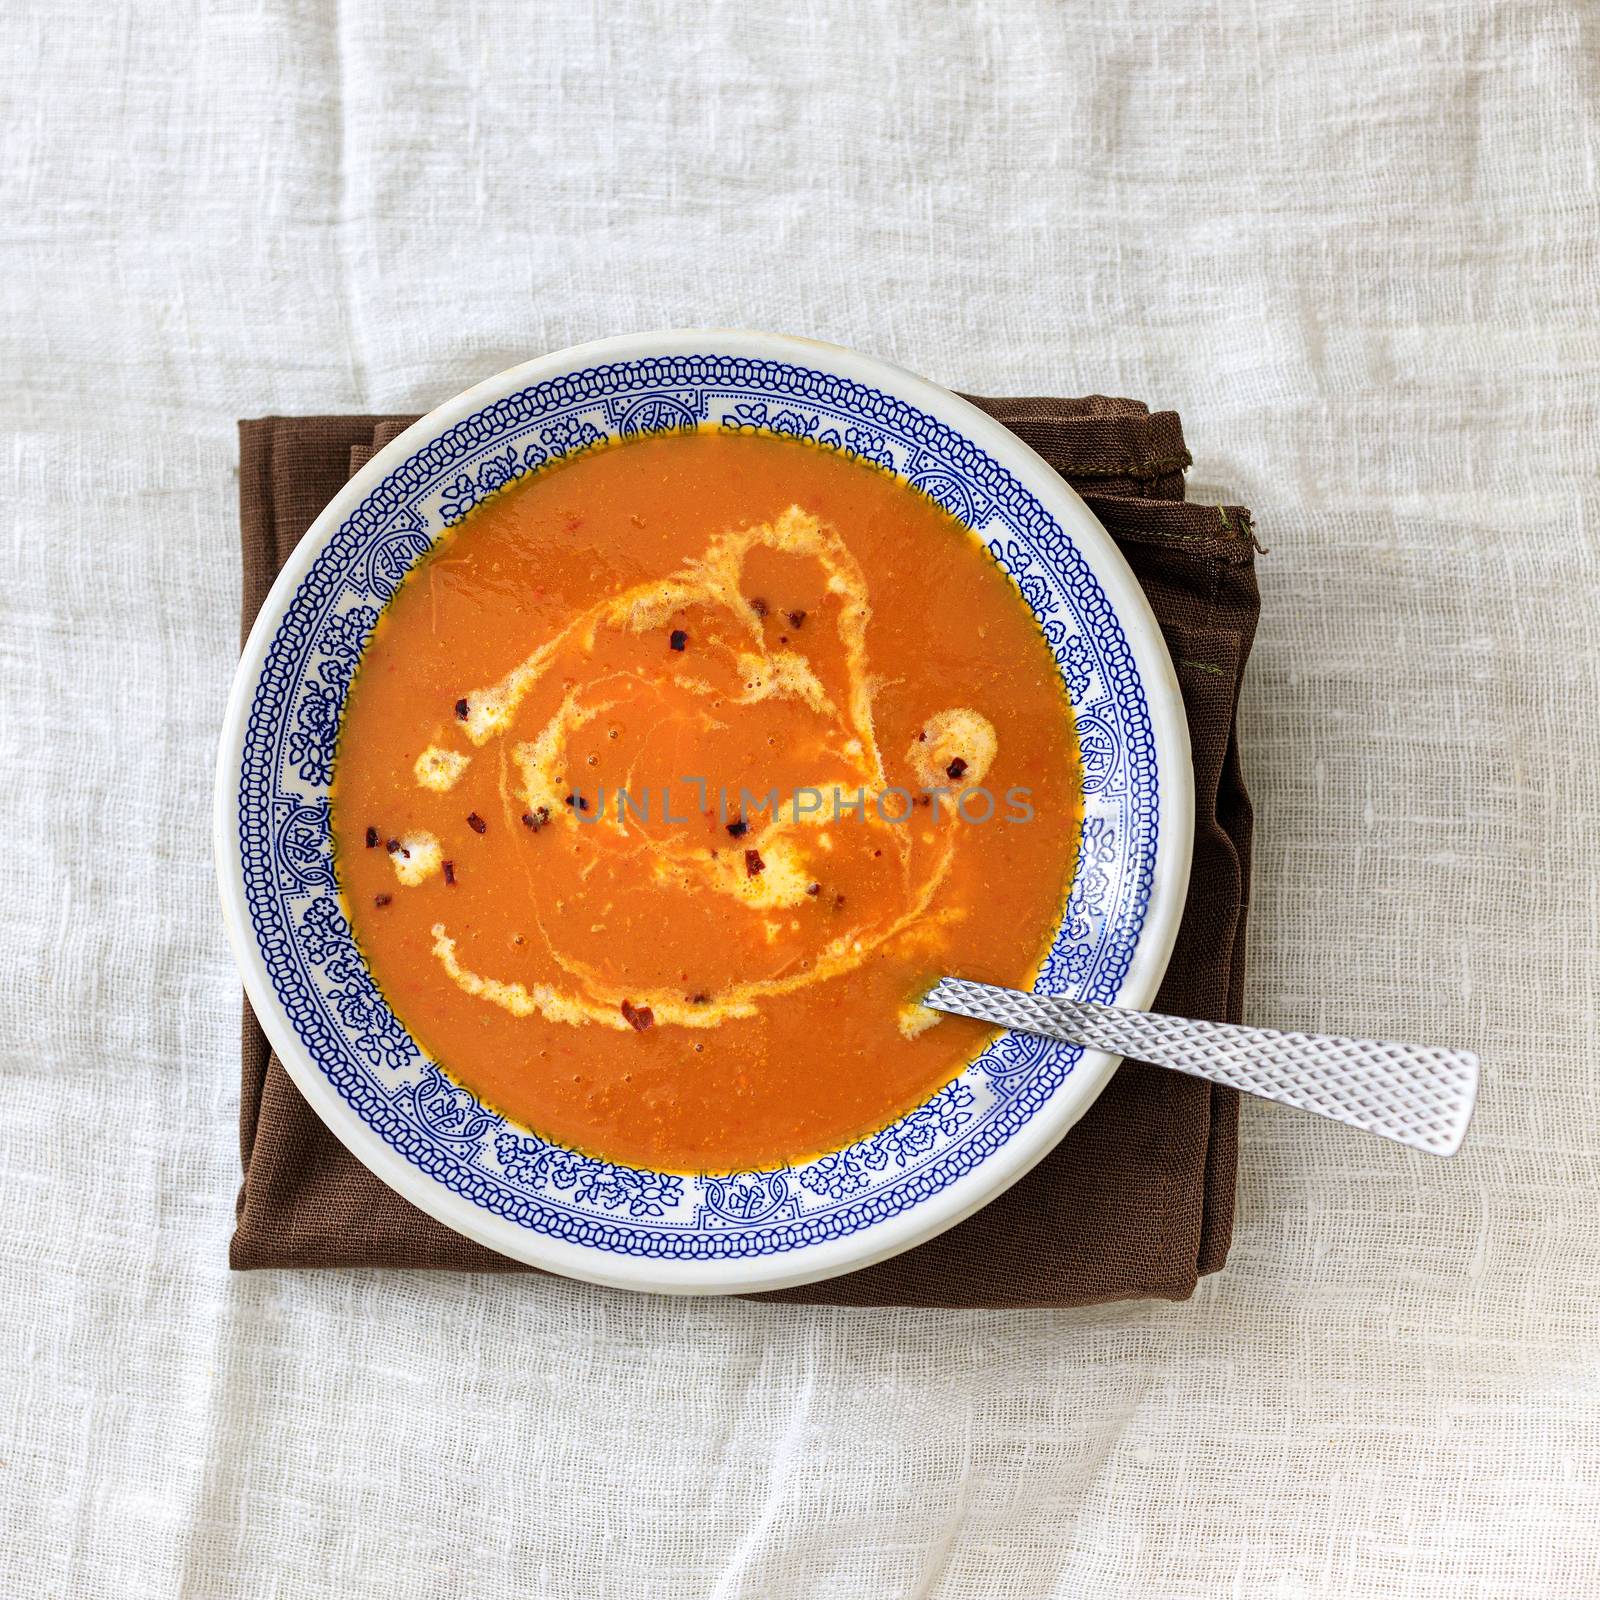 Orange pumpkin puree soup with smerana and red chili peppers in a plate with a blue traditional Moroccan pattern on a plain white background. Flat lay. Top view, copy space. by Tanacha